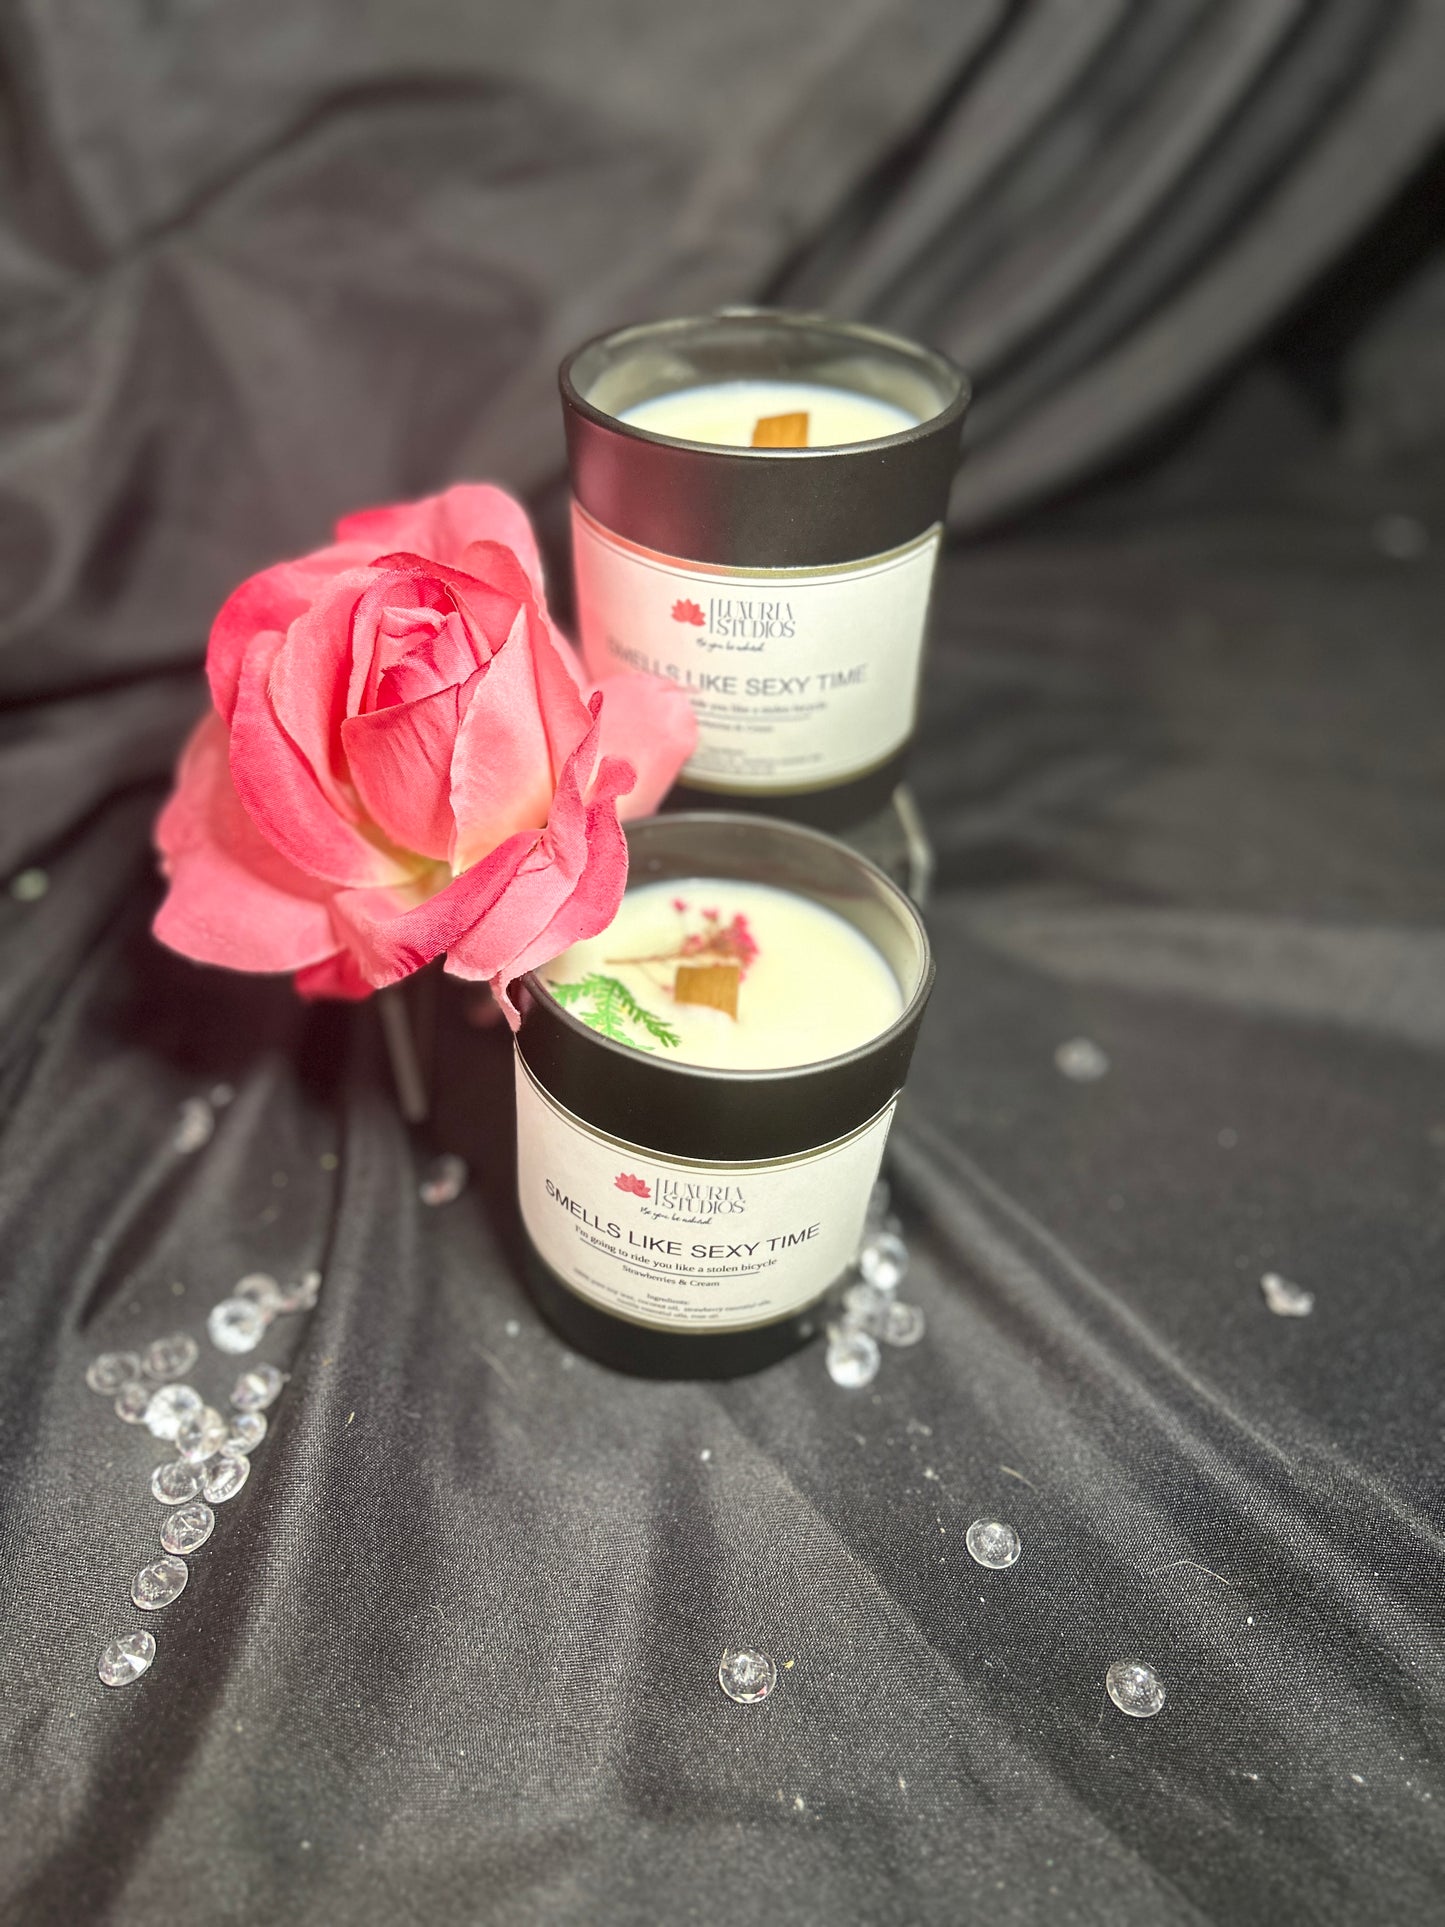 Smells like Sexy Time - Strawberries and Cream Candle